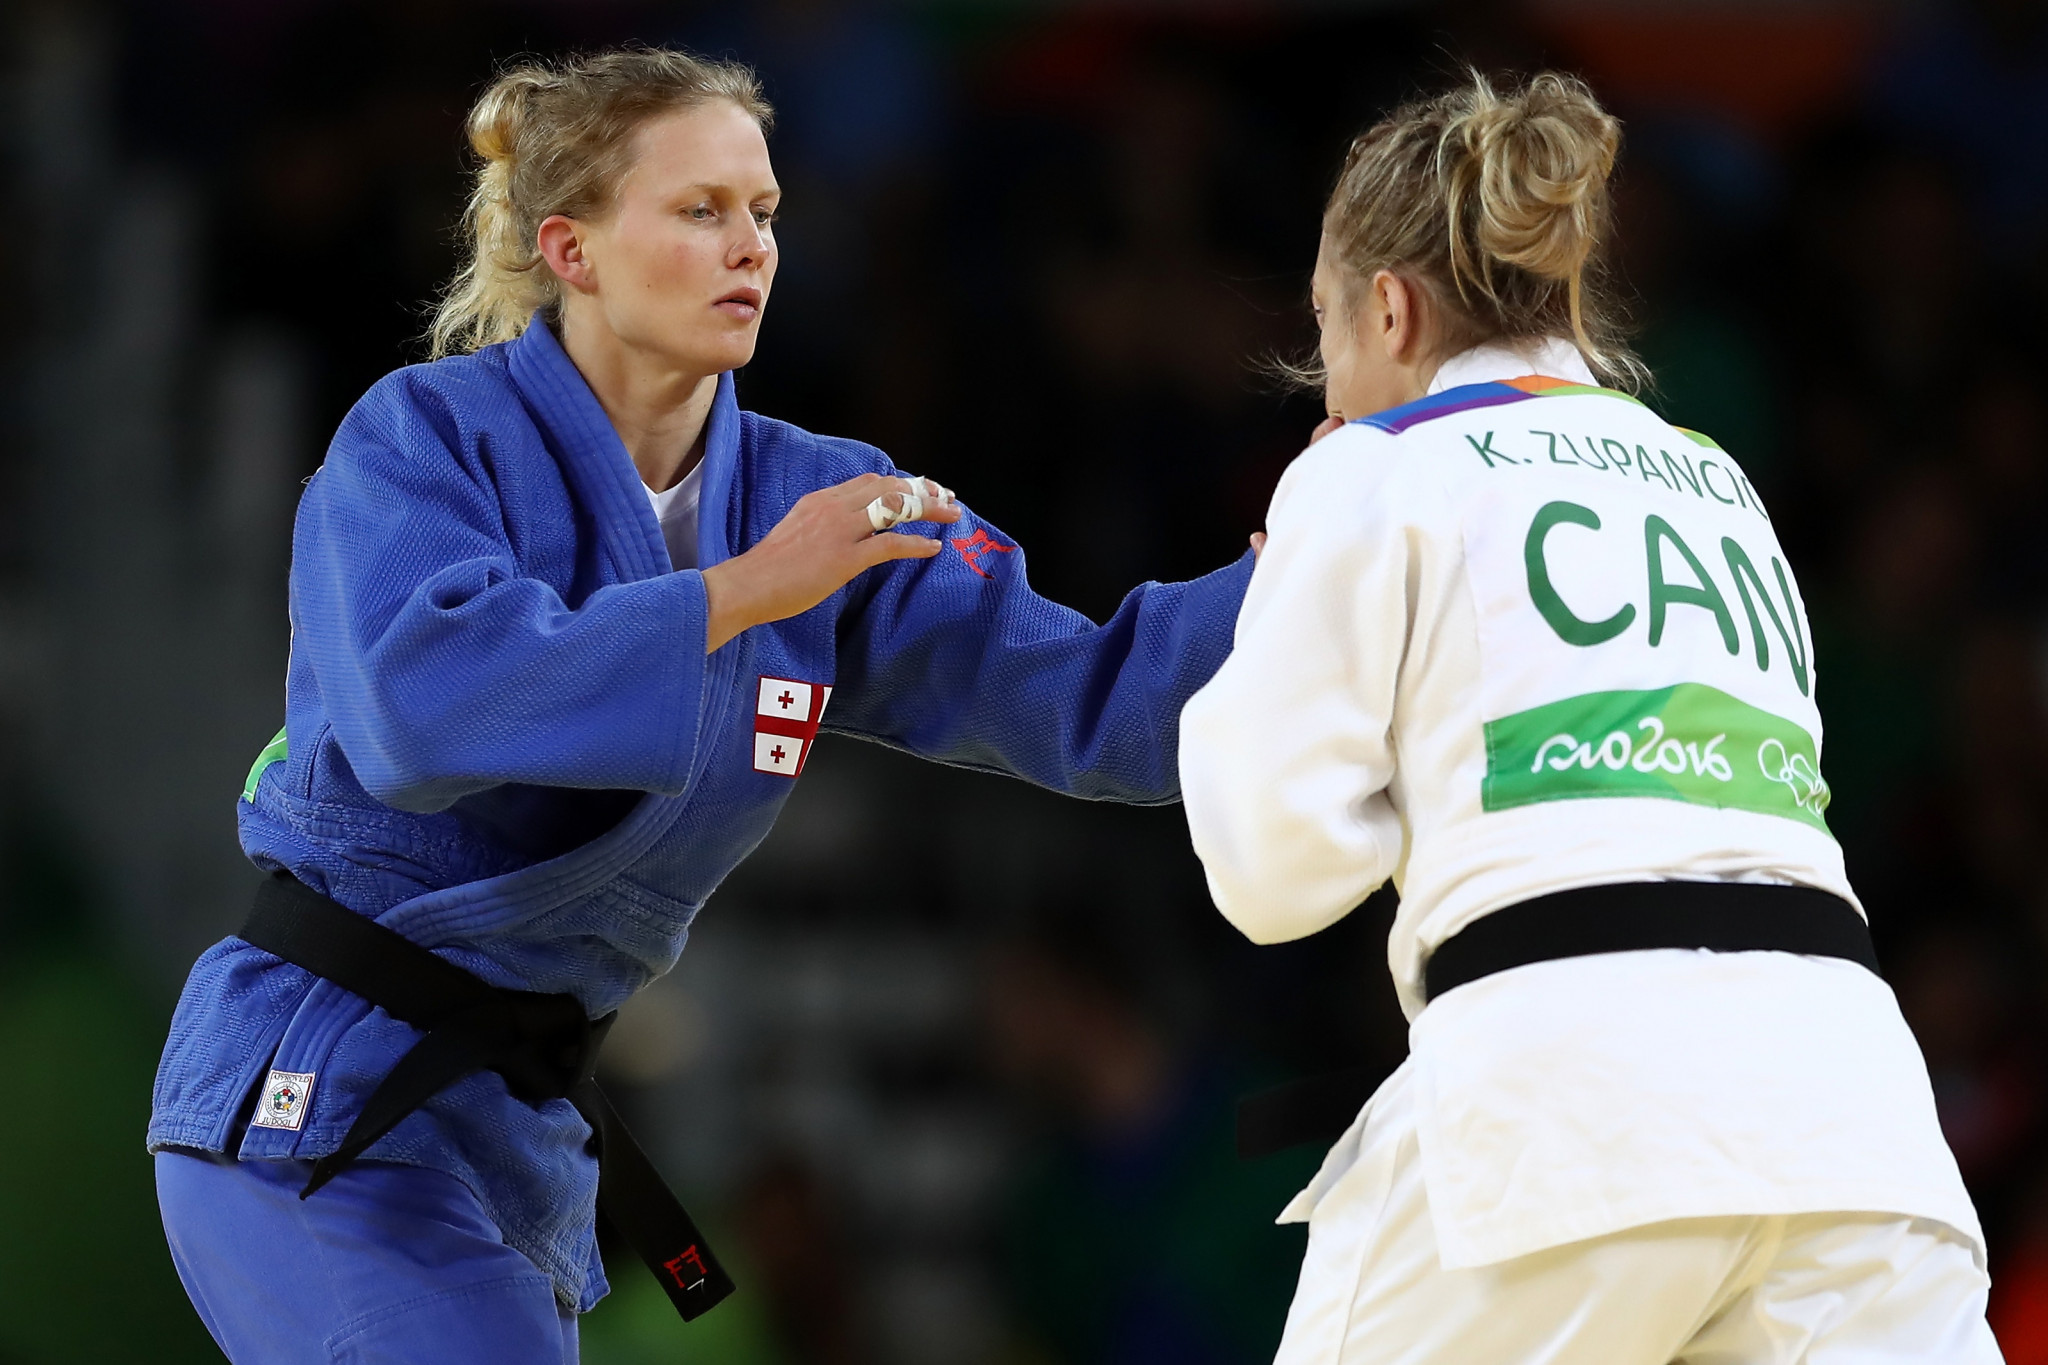 Judo Olympian Esther Stam of Georgia will commentate on the IBSA 2018 Judo World Championships ©Getty Images